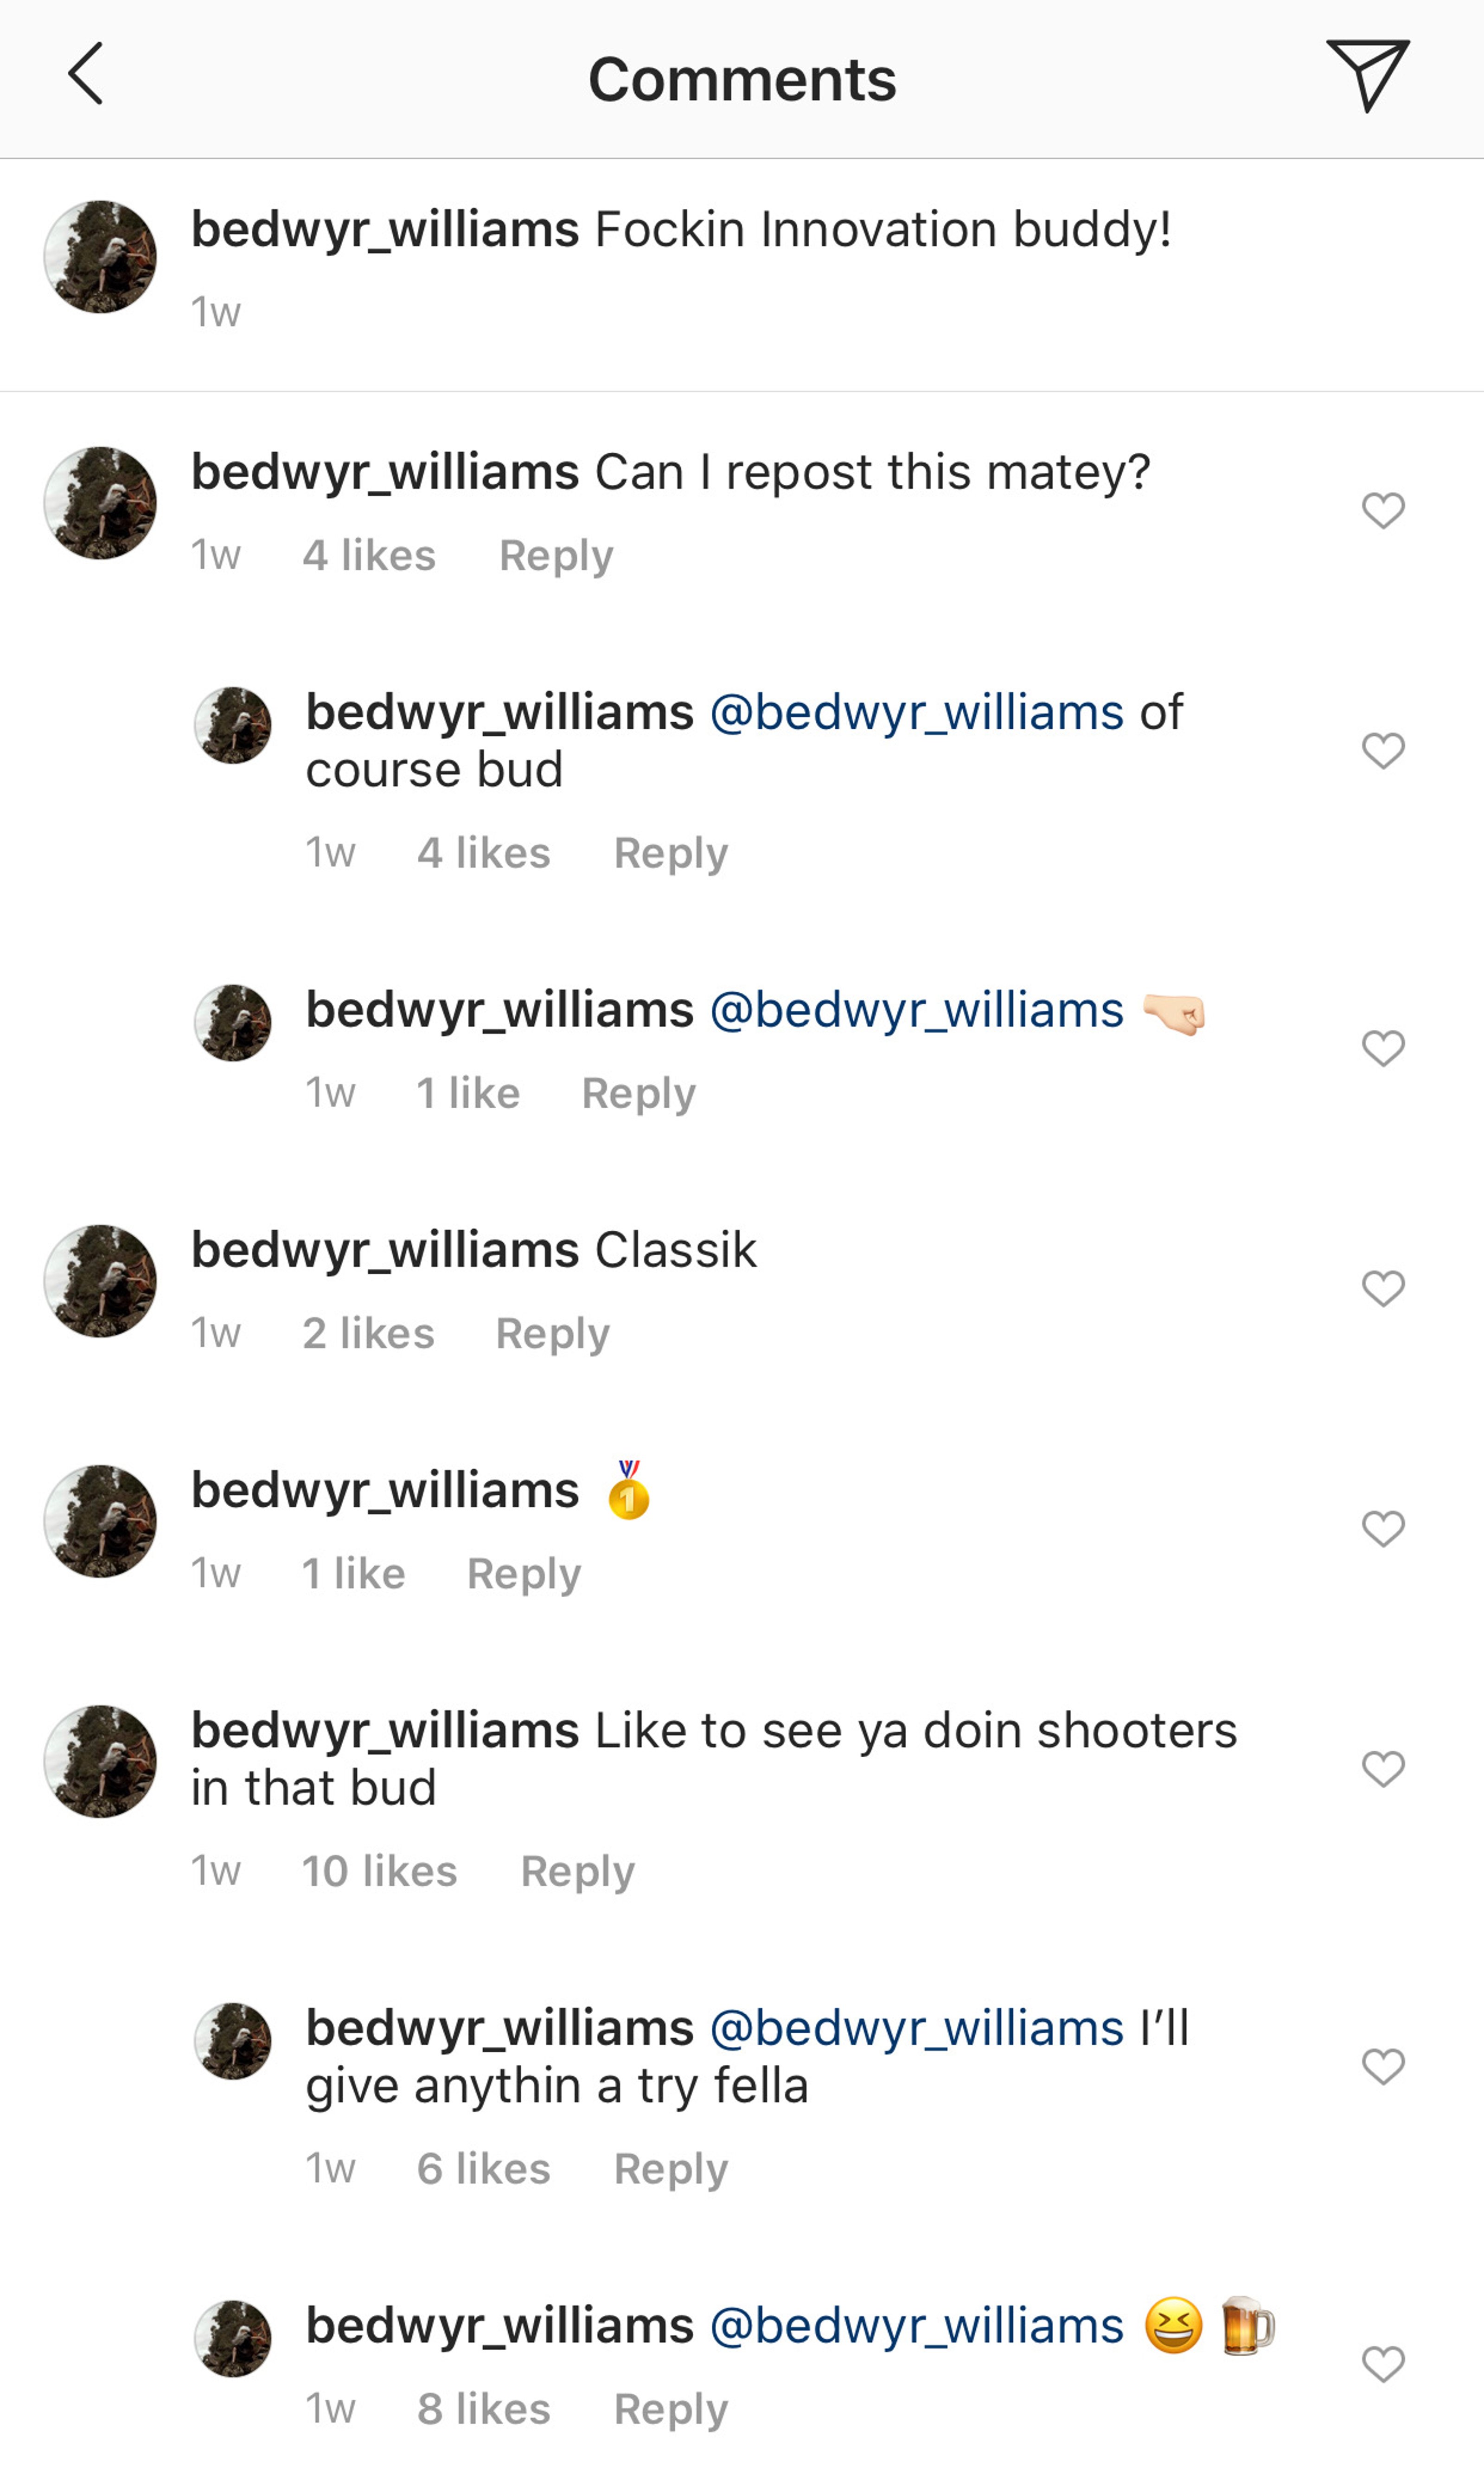 Comments on Bedwyr Williams' Instagram account